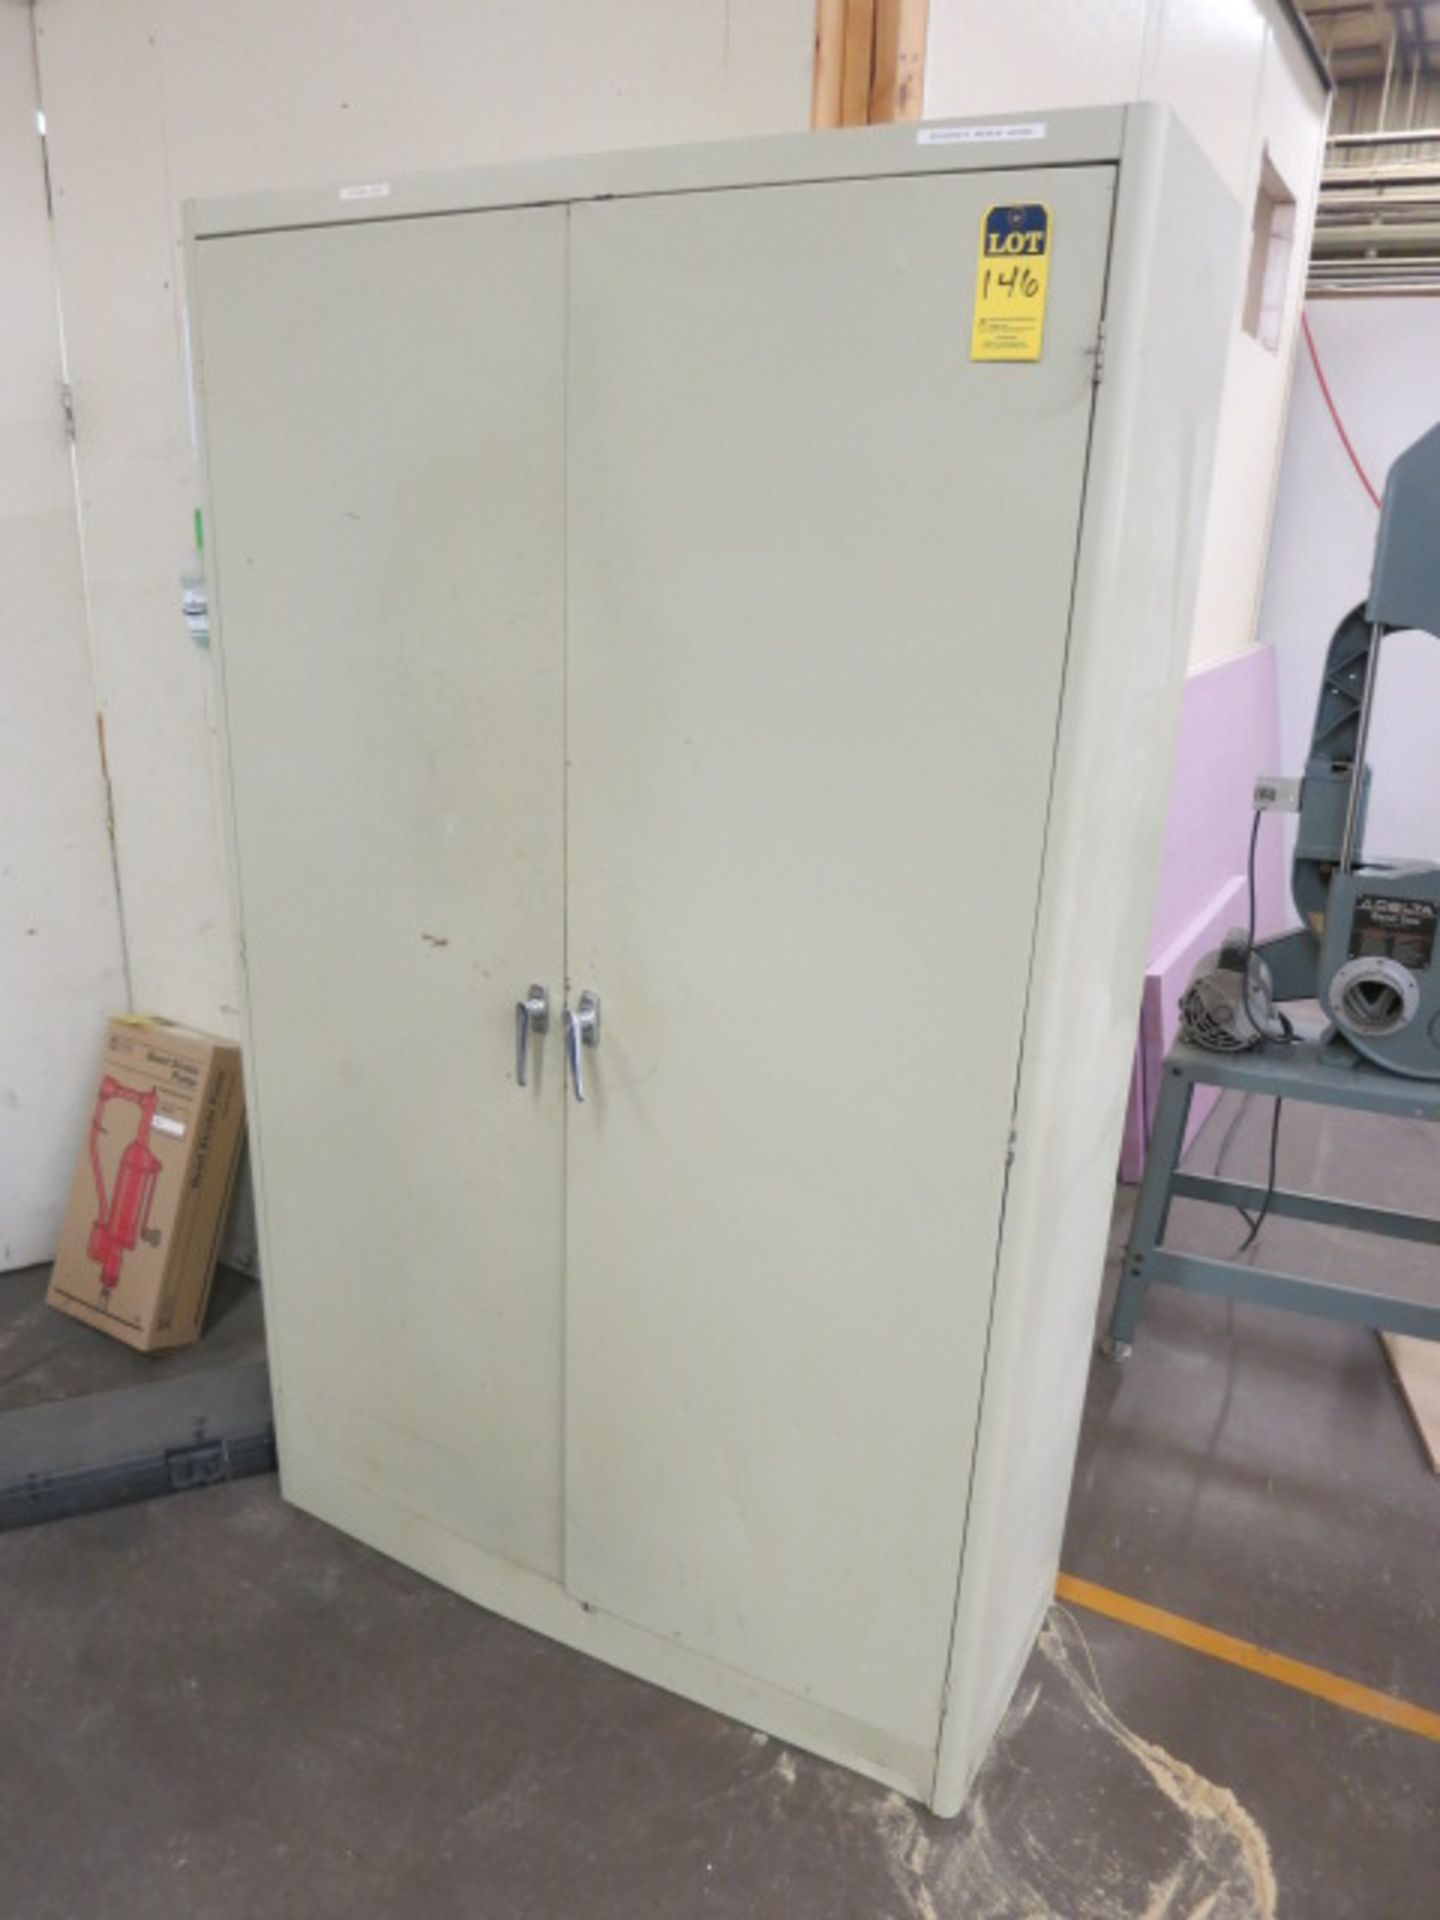 Steel Cabinet - removal available October 26, 2018